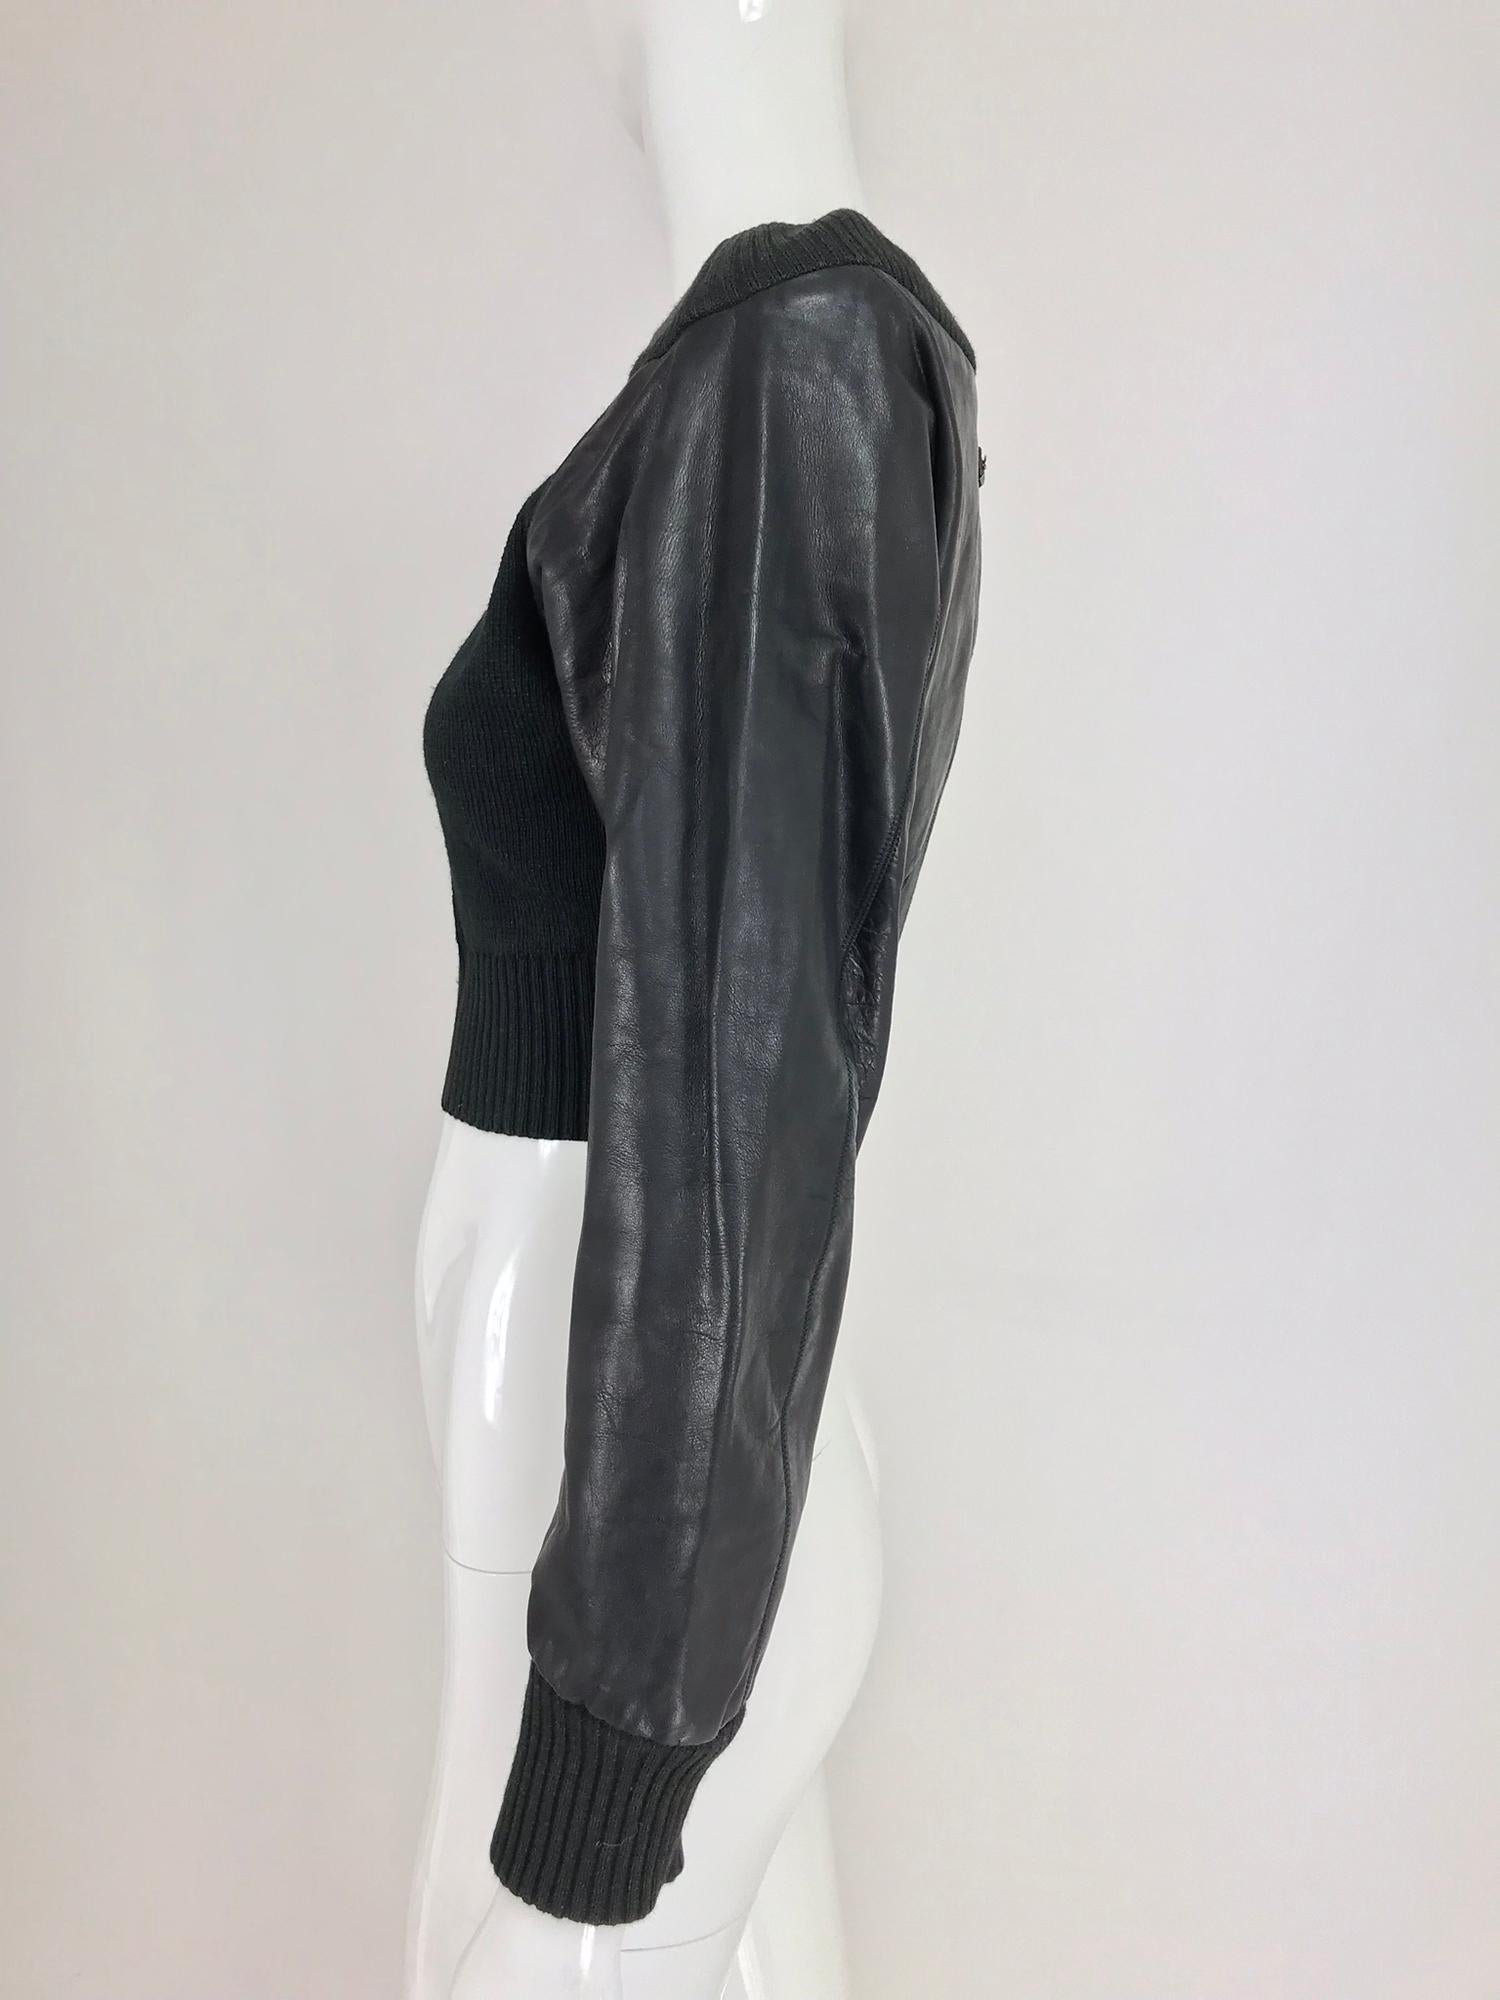 Jean Paul Gaultier black leather and Knit Off the Shoulder Jacket 1990s 4